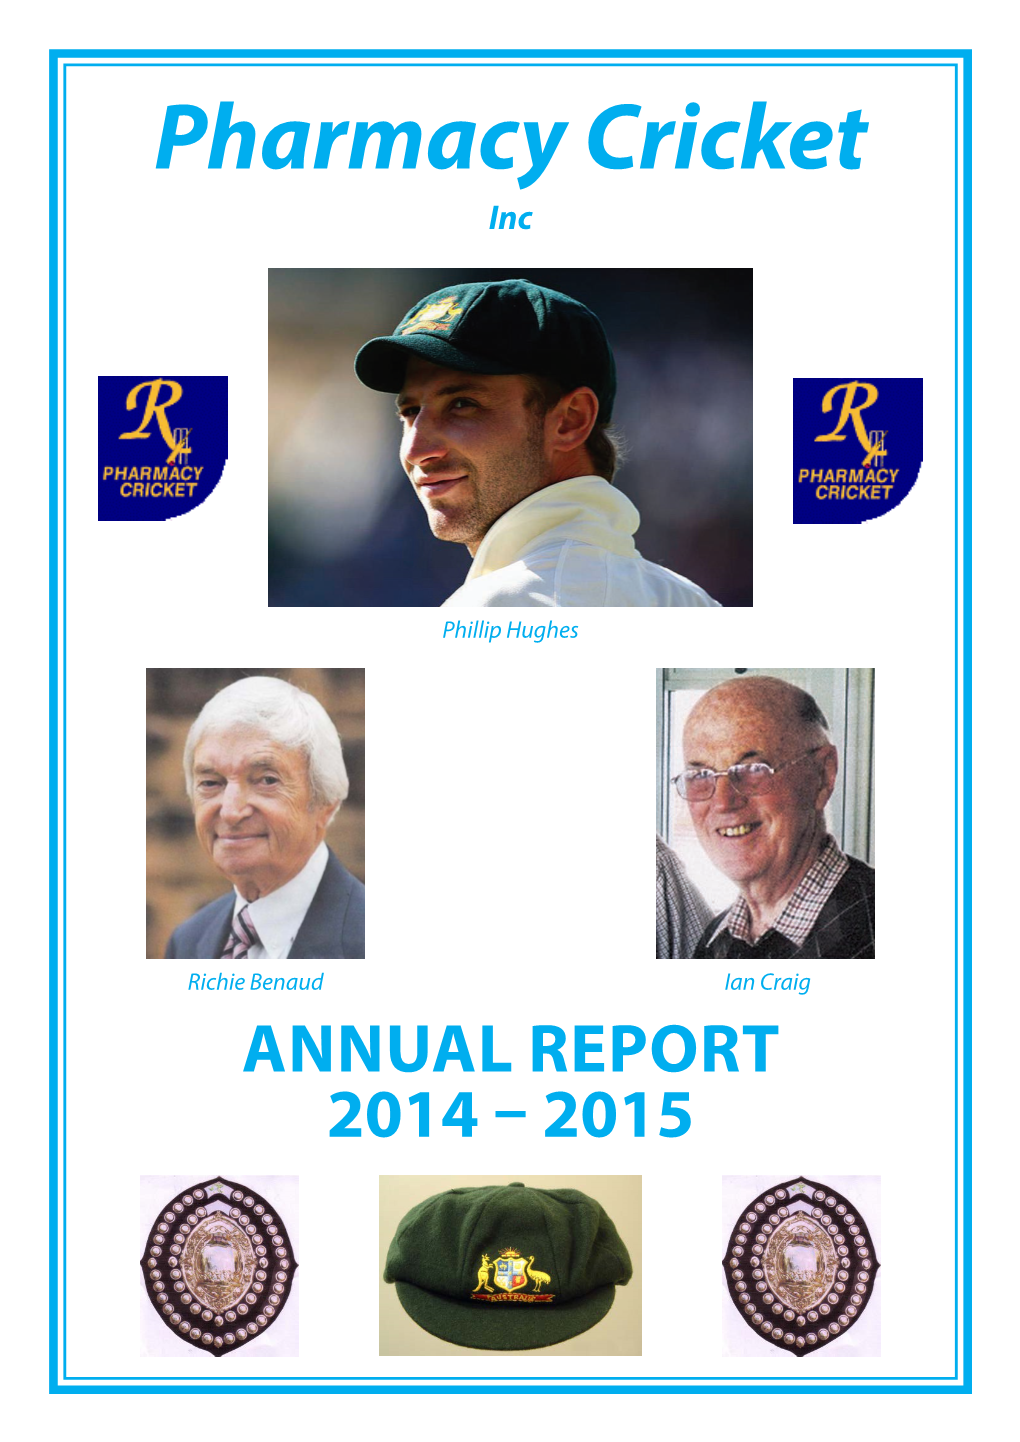 Pharmacy Cricket Annual Report 2014